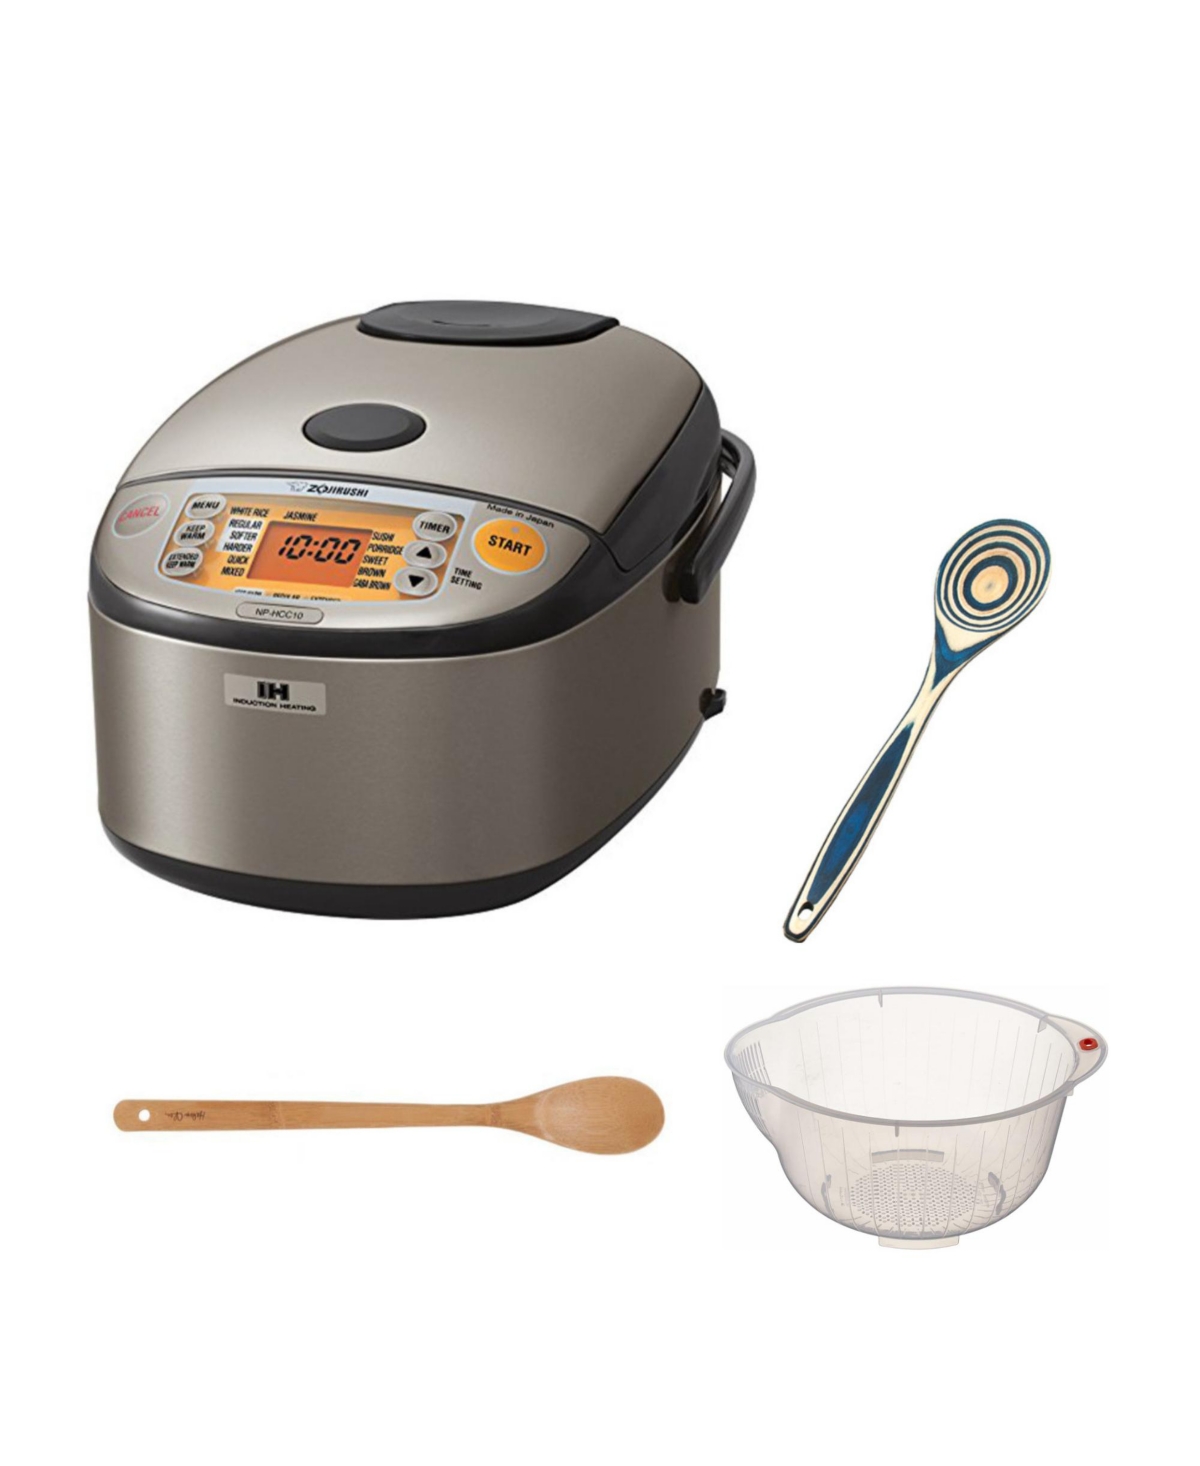 NPHCC18XH Induction Heating System Rice Cooker Bundle with Accessories - Dark Grey